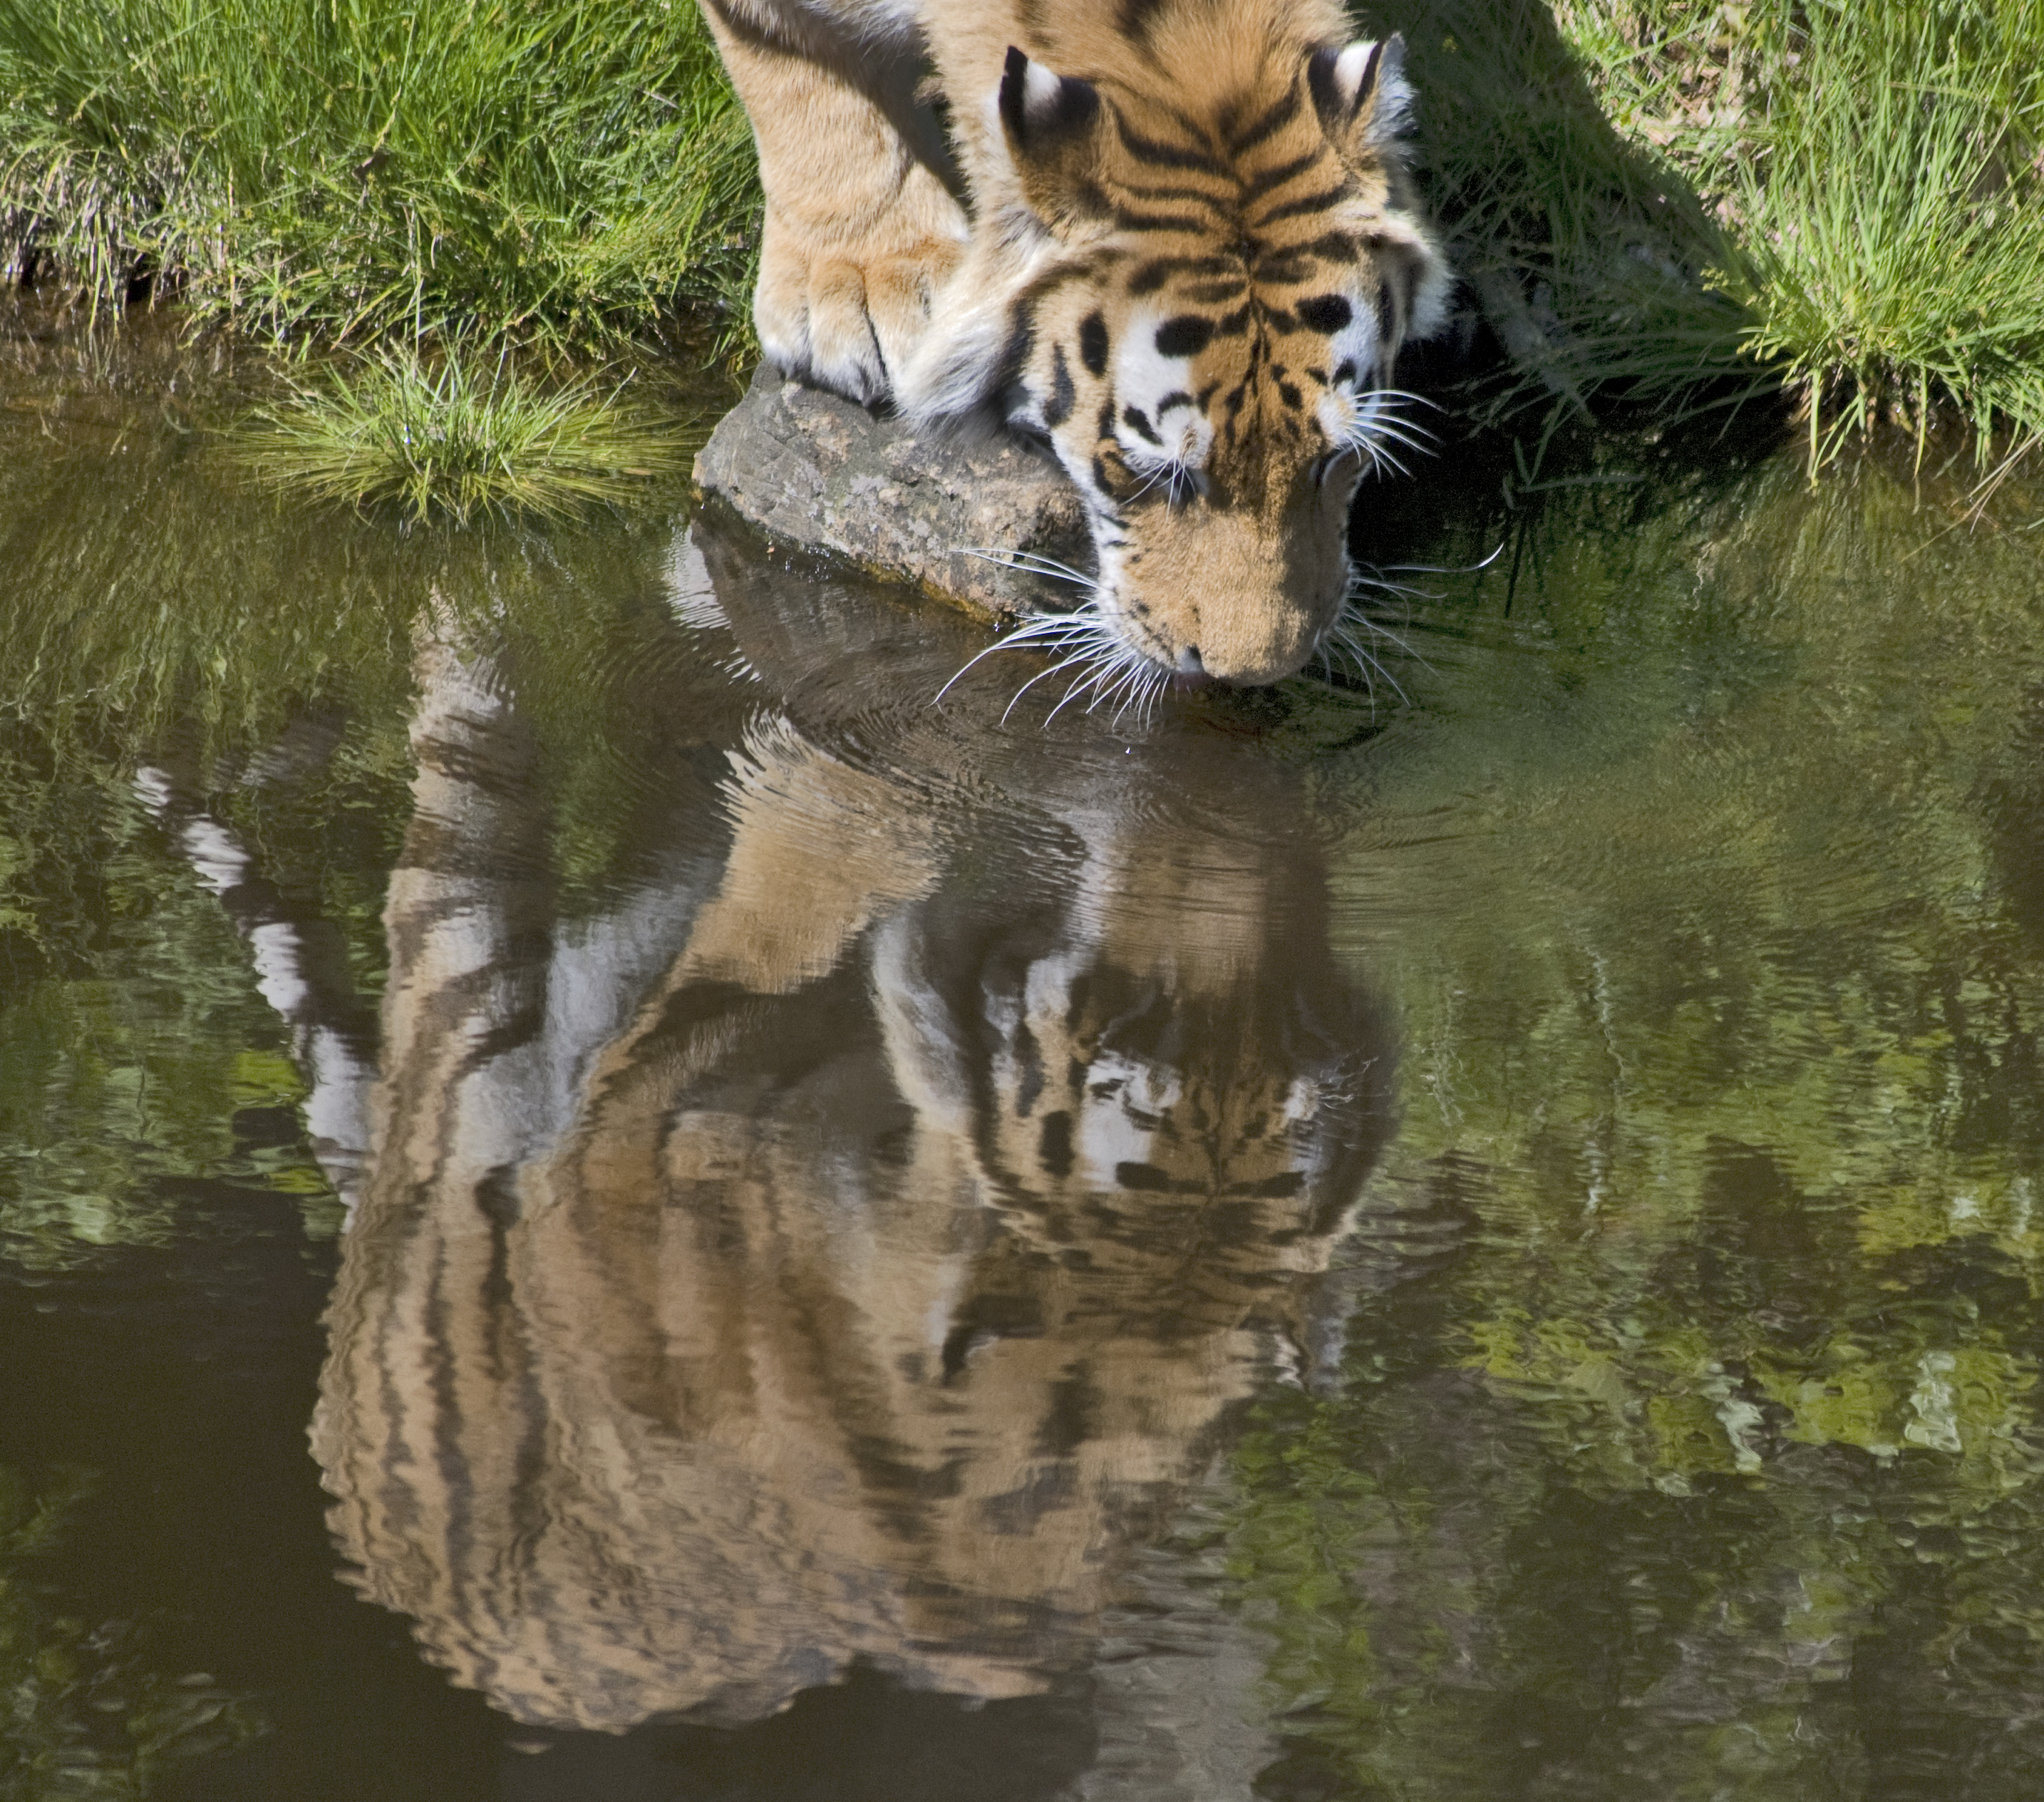 File:Tiger drinking water (5332575336).jpg - Wikimedia Commons